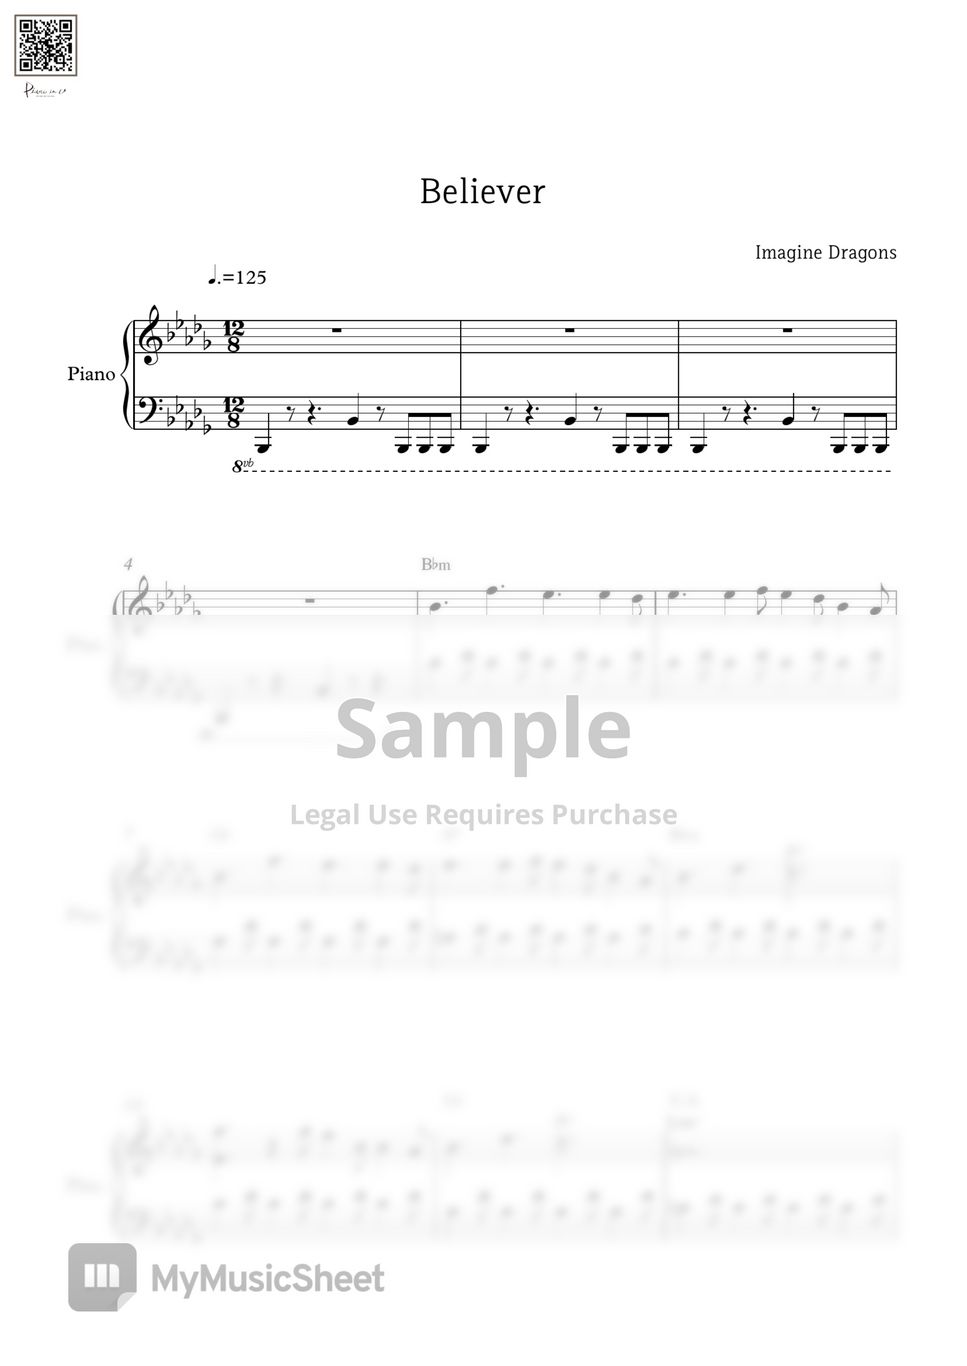 Imagine Dragons - Believer Sheets by PIANOiNU